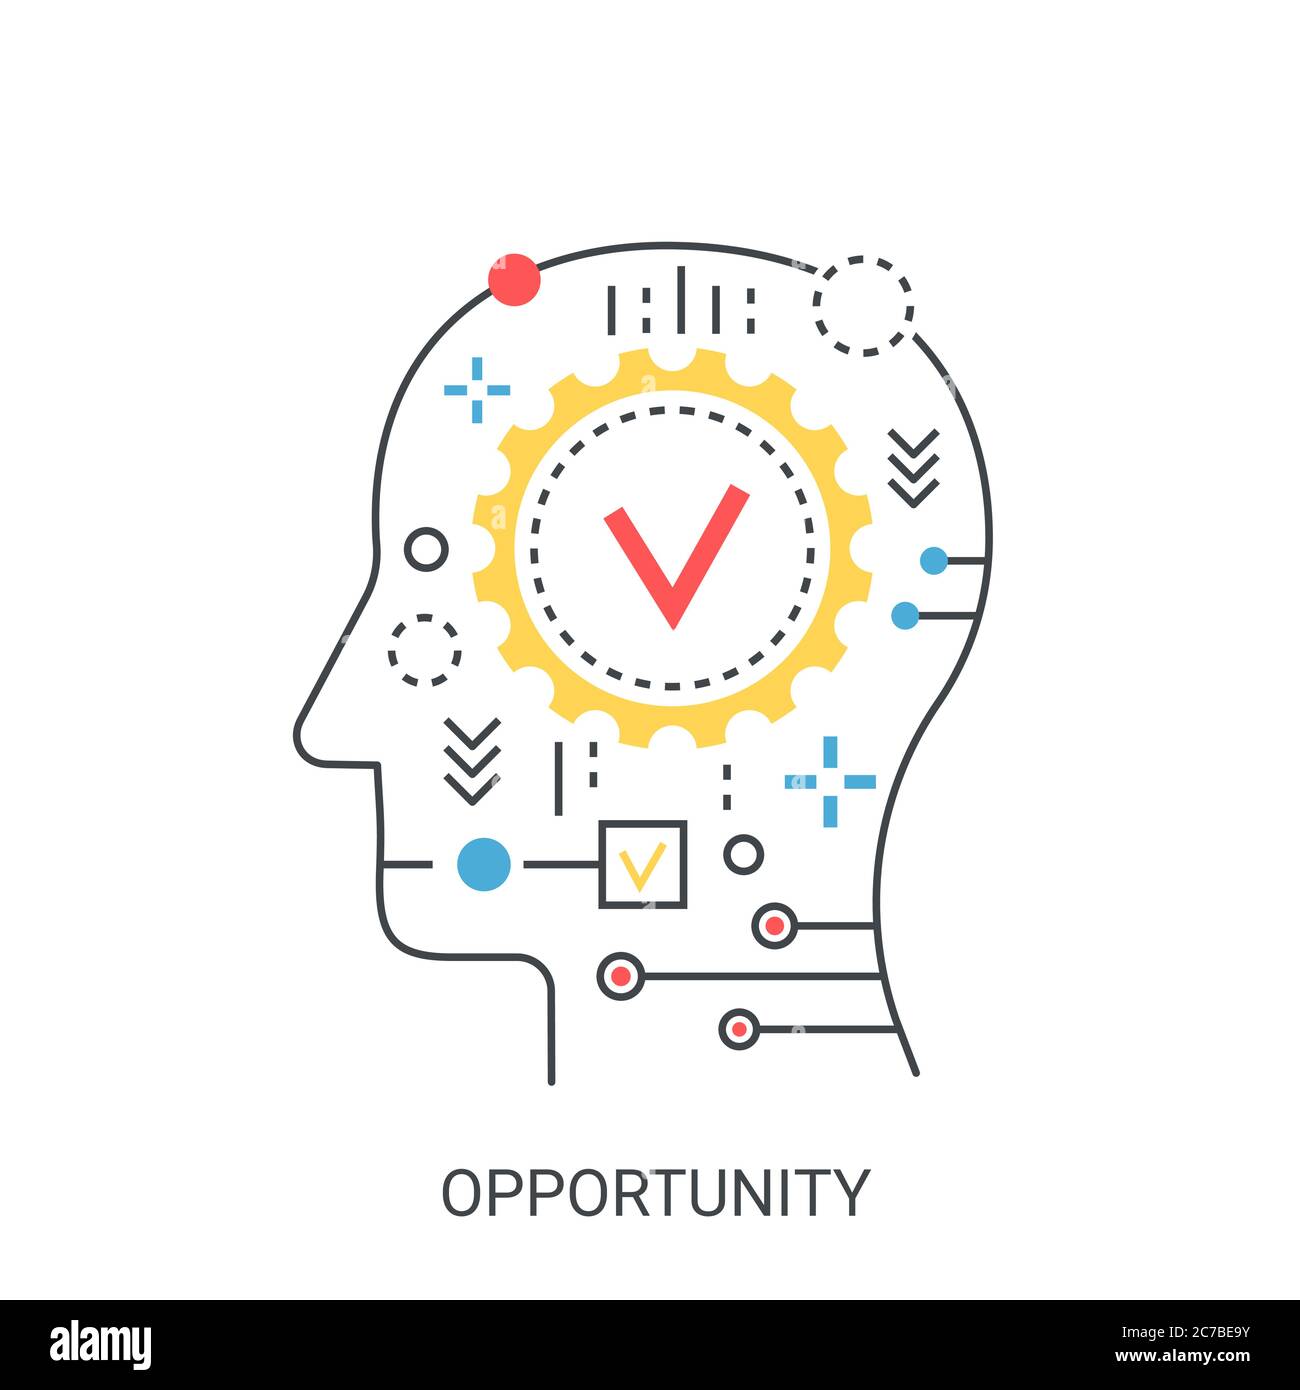 Opportunity flat line vector illustration concept isolated Stock Vector